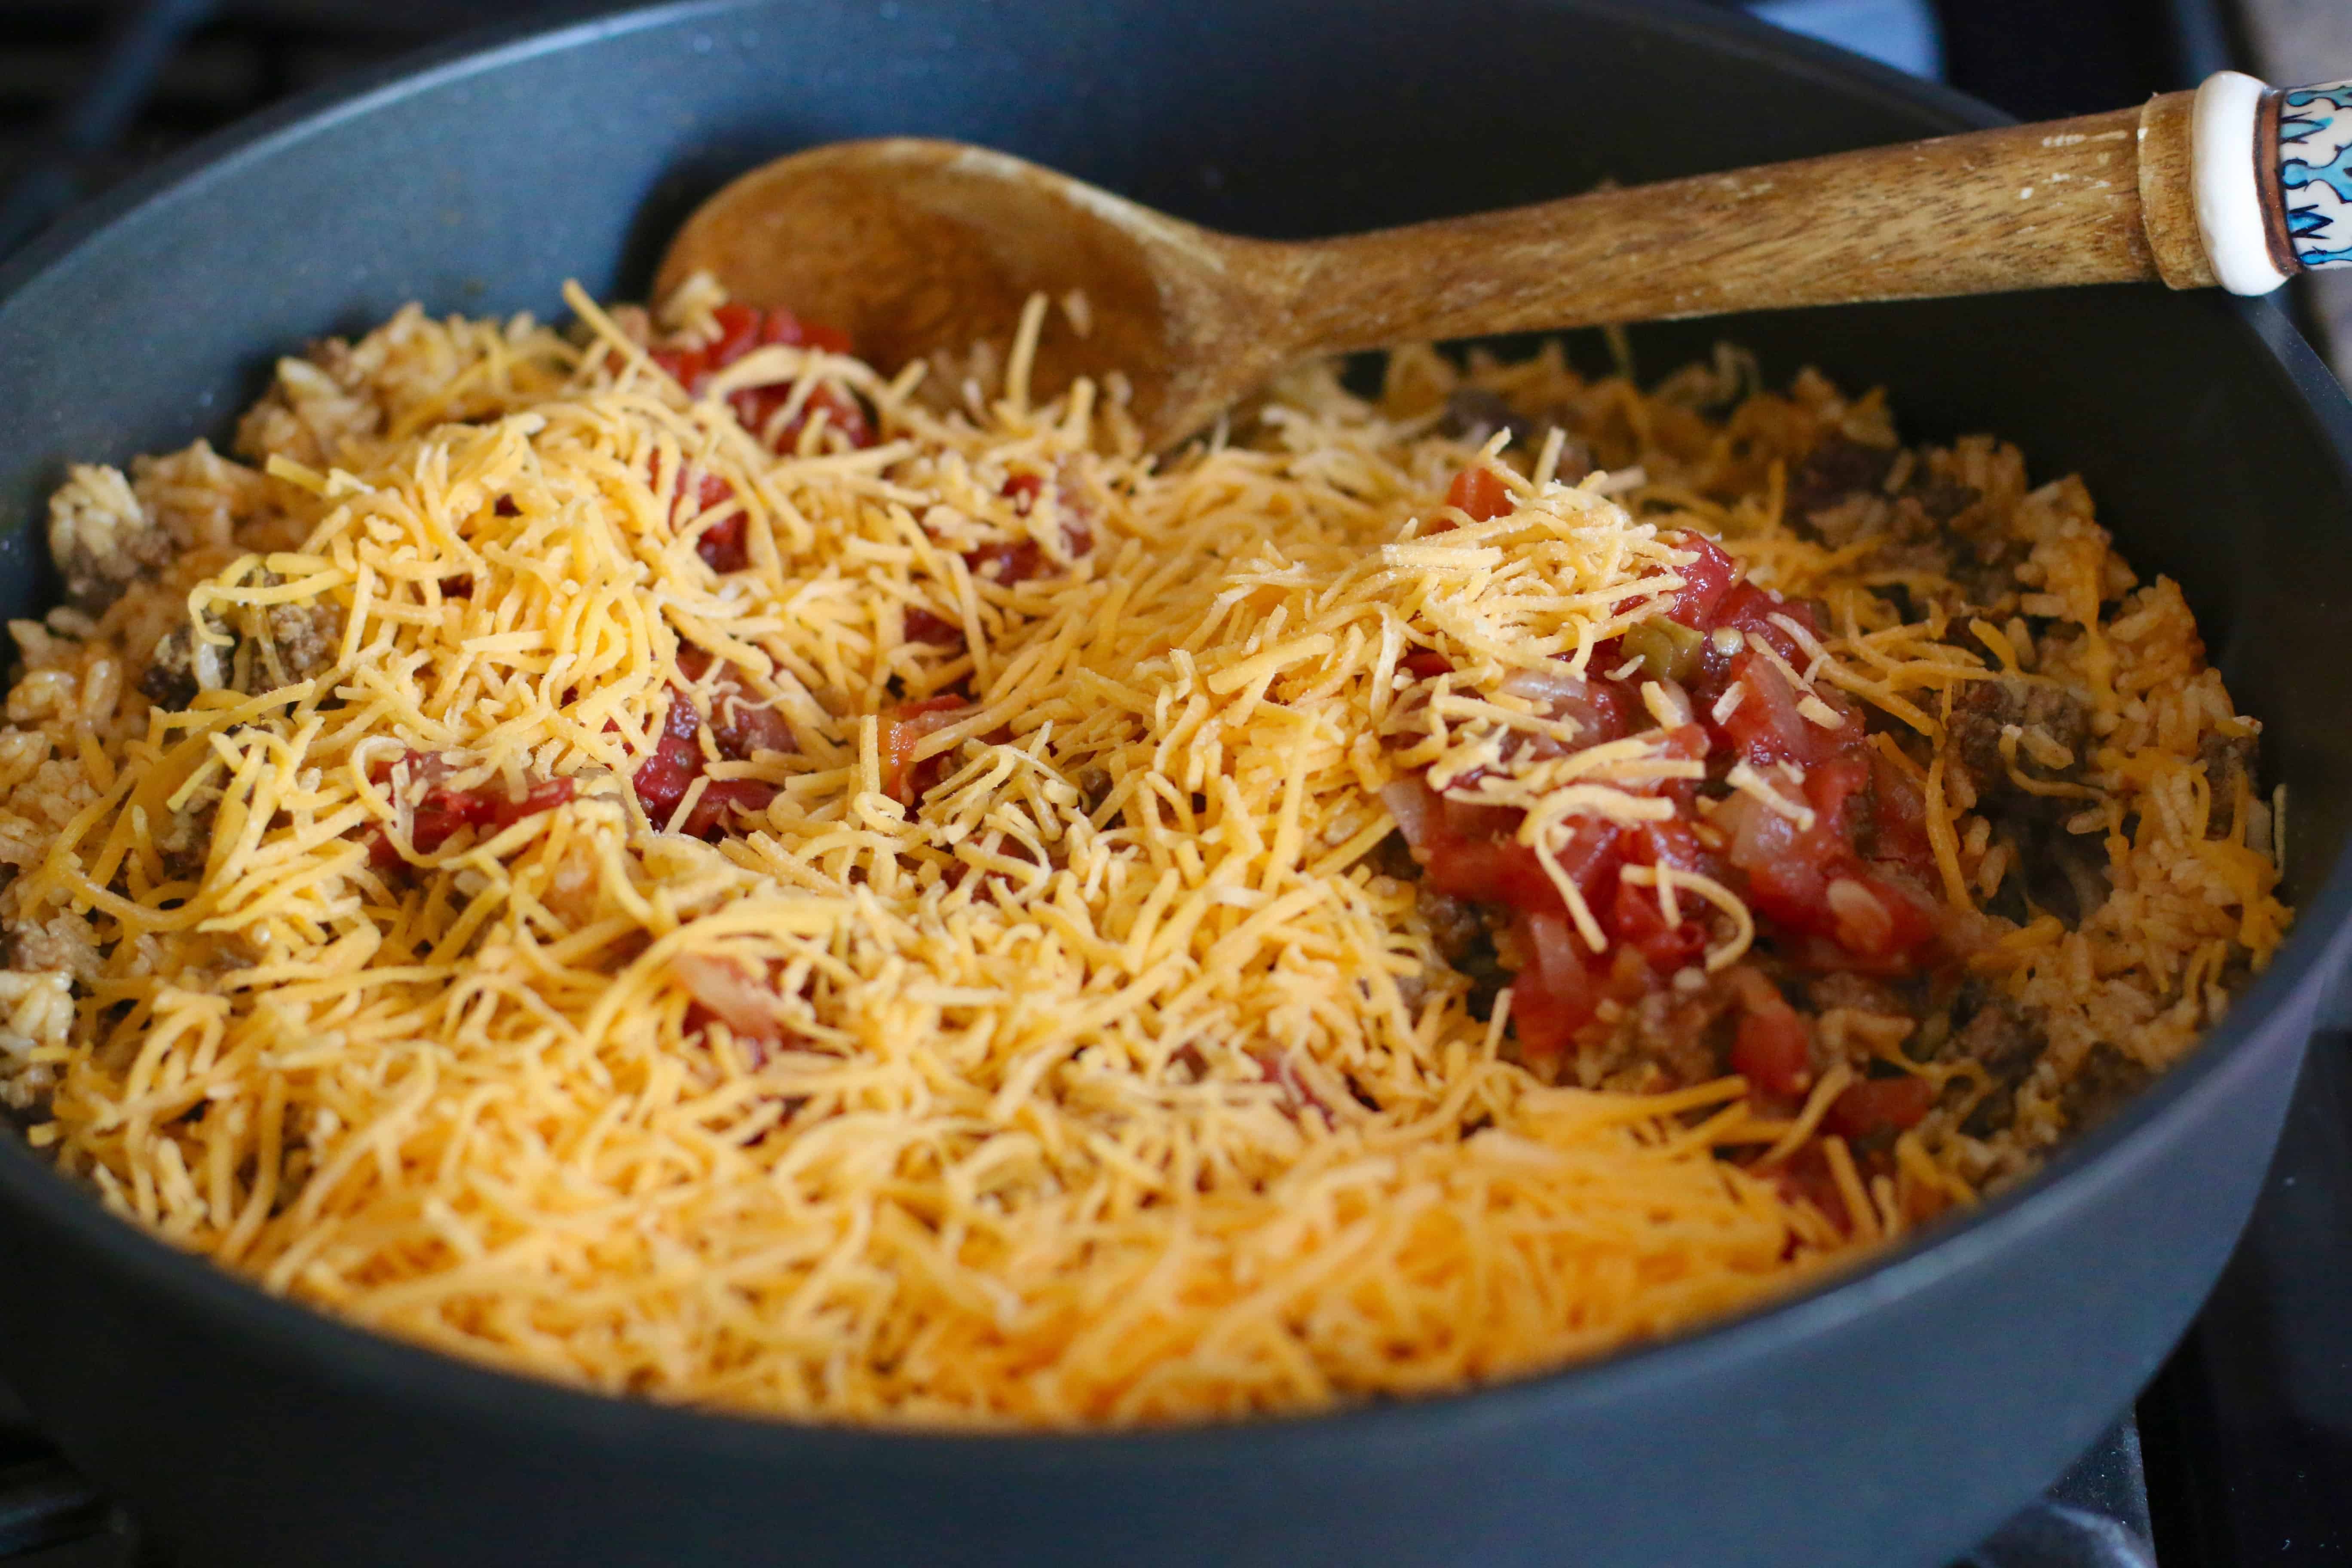 shredded cheese and salsa added to taco rice mixture in large skillet.